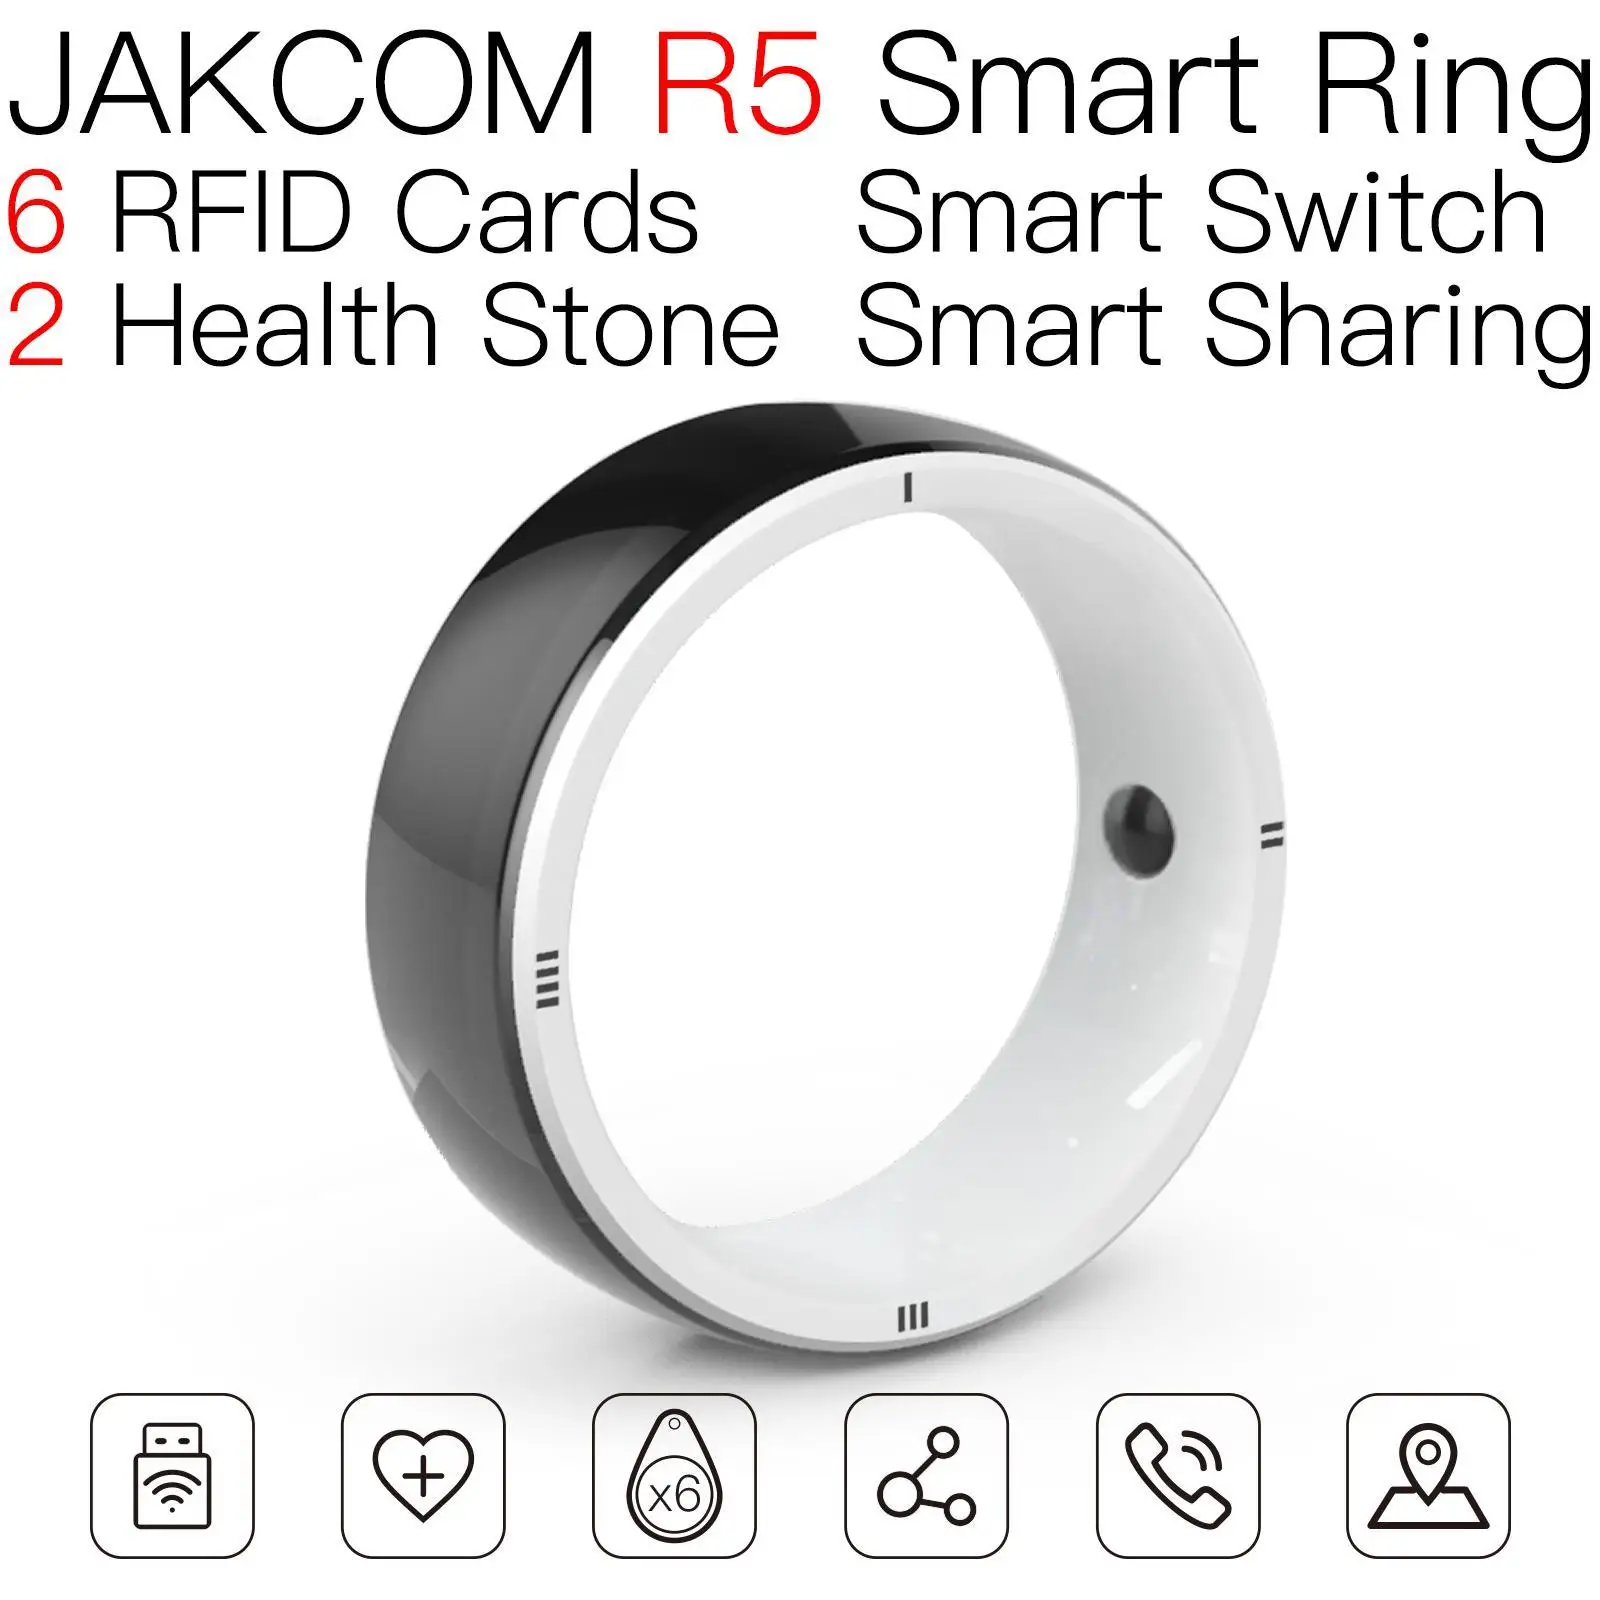 

JAKCOM R5 Smart Ring better than aln9662 printable tag anti metal sticker trolley token key ring nfc for name tags rfid reader